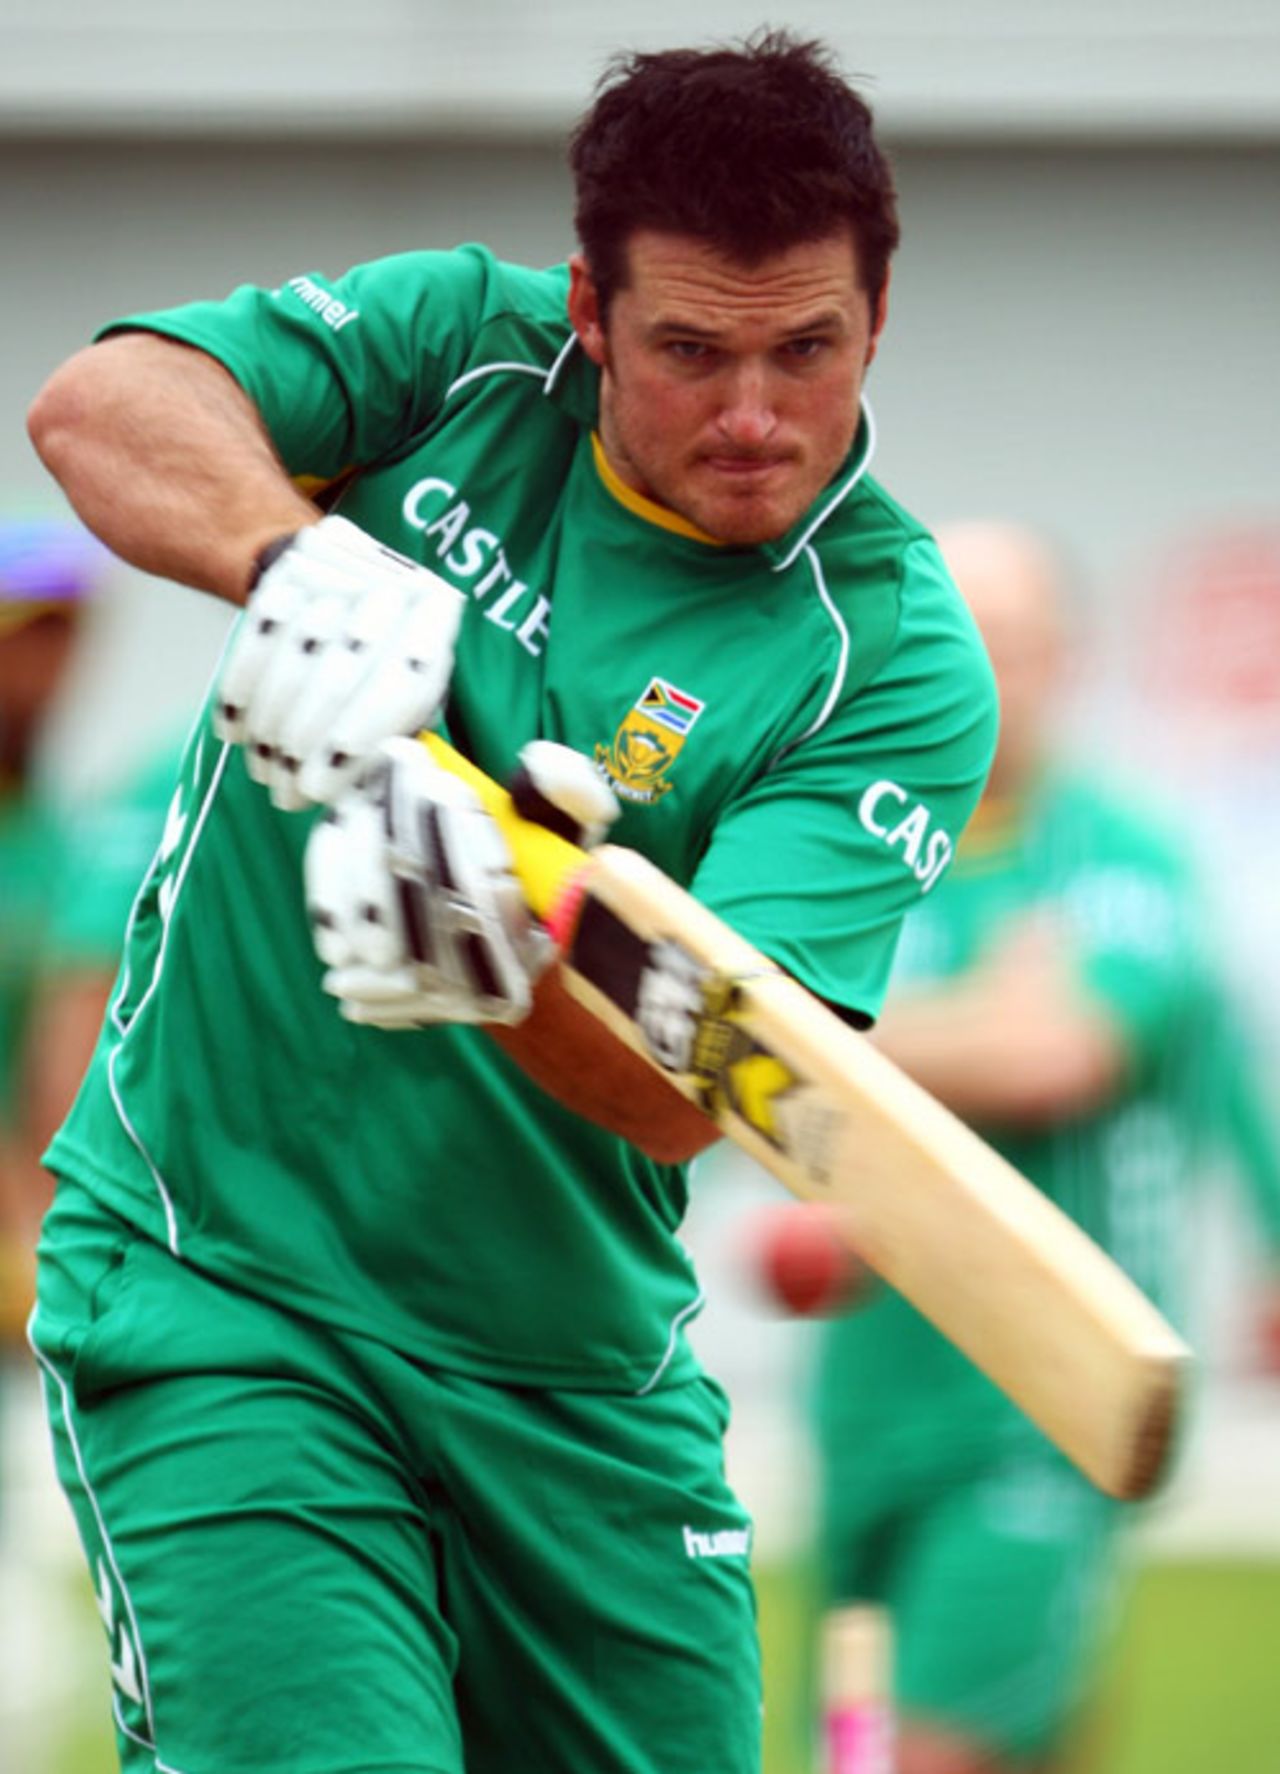 Graeme Smith pulls the ball during a net session ahead of the third Test, Sydney, January 2, 2009